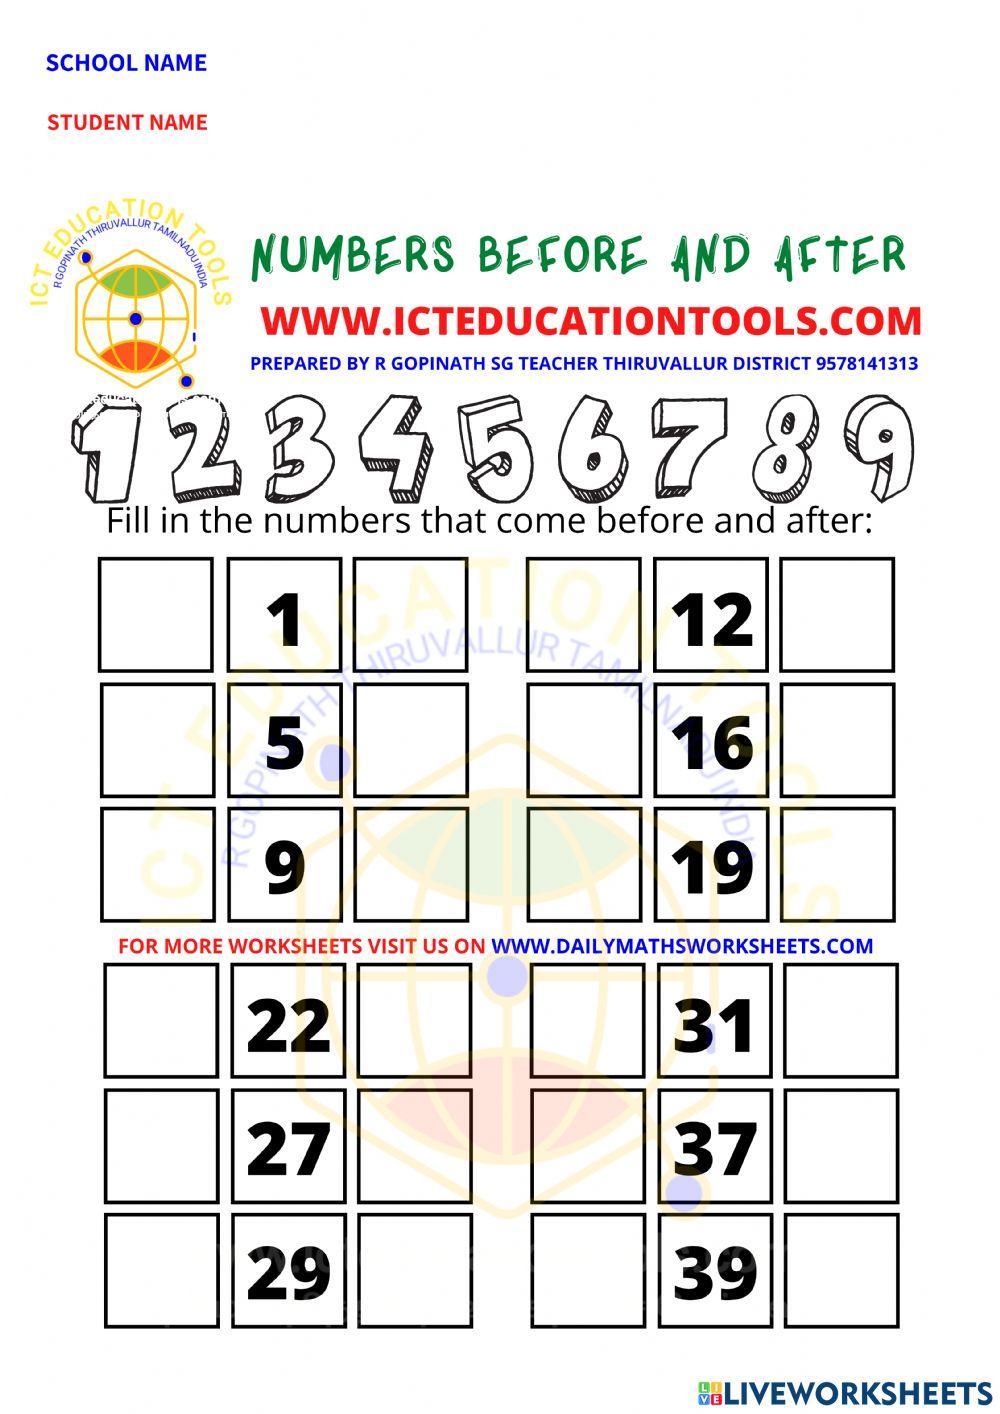 Class 1 numbers